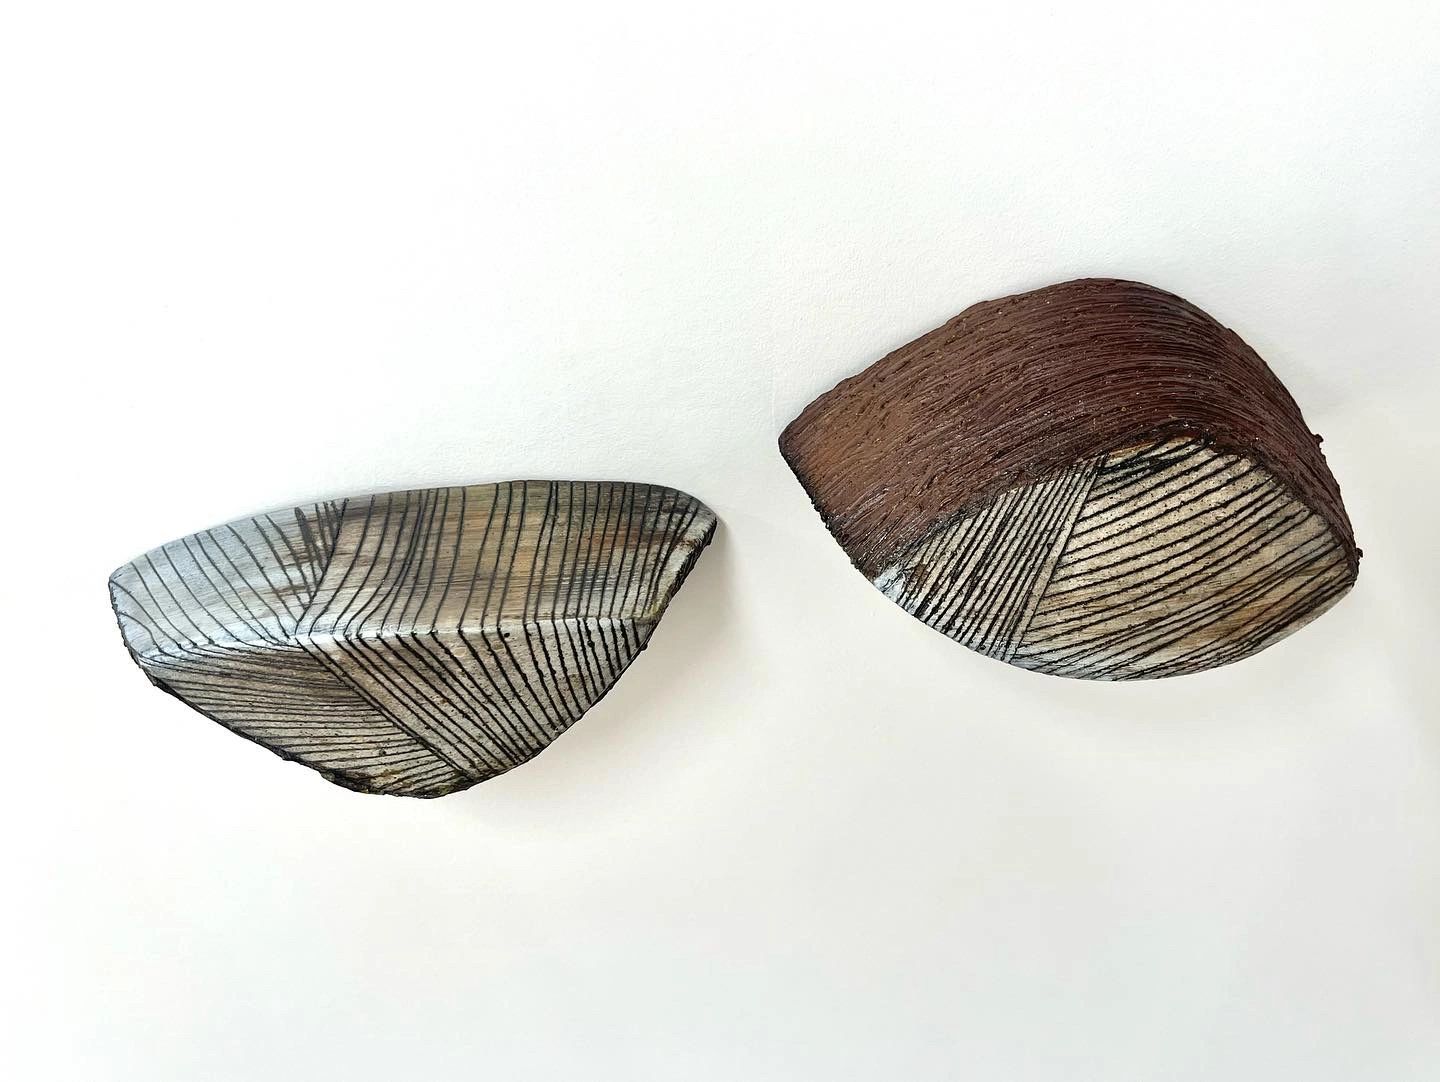 Two wall mounted pod-like ceramic sculptures, dark lines on the surface and brown texture